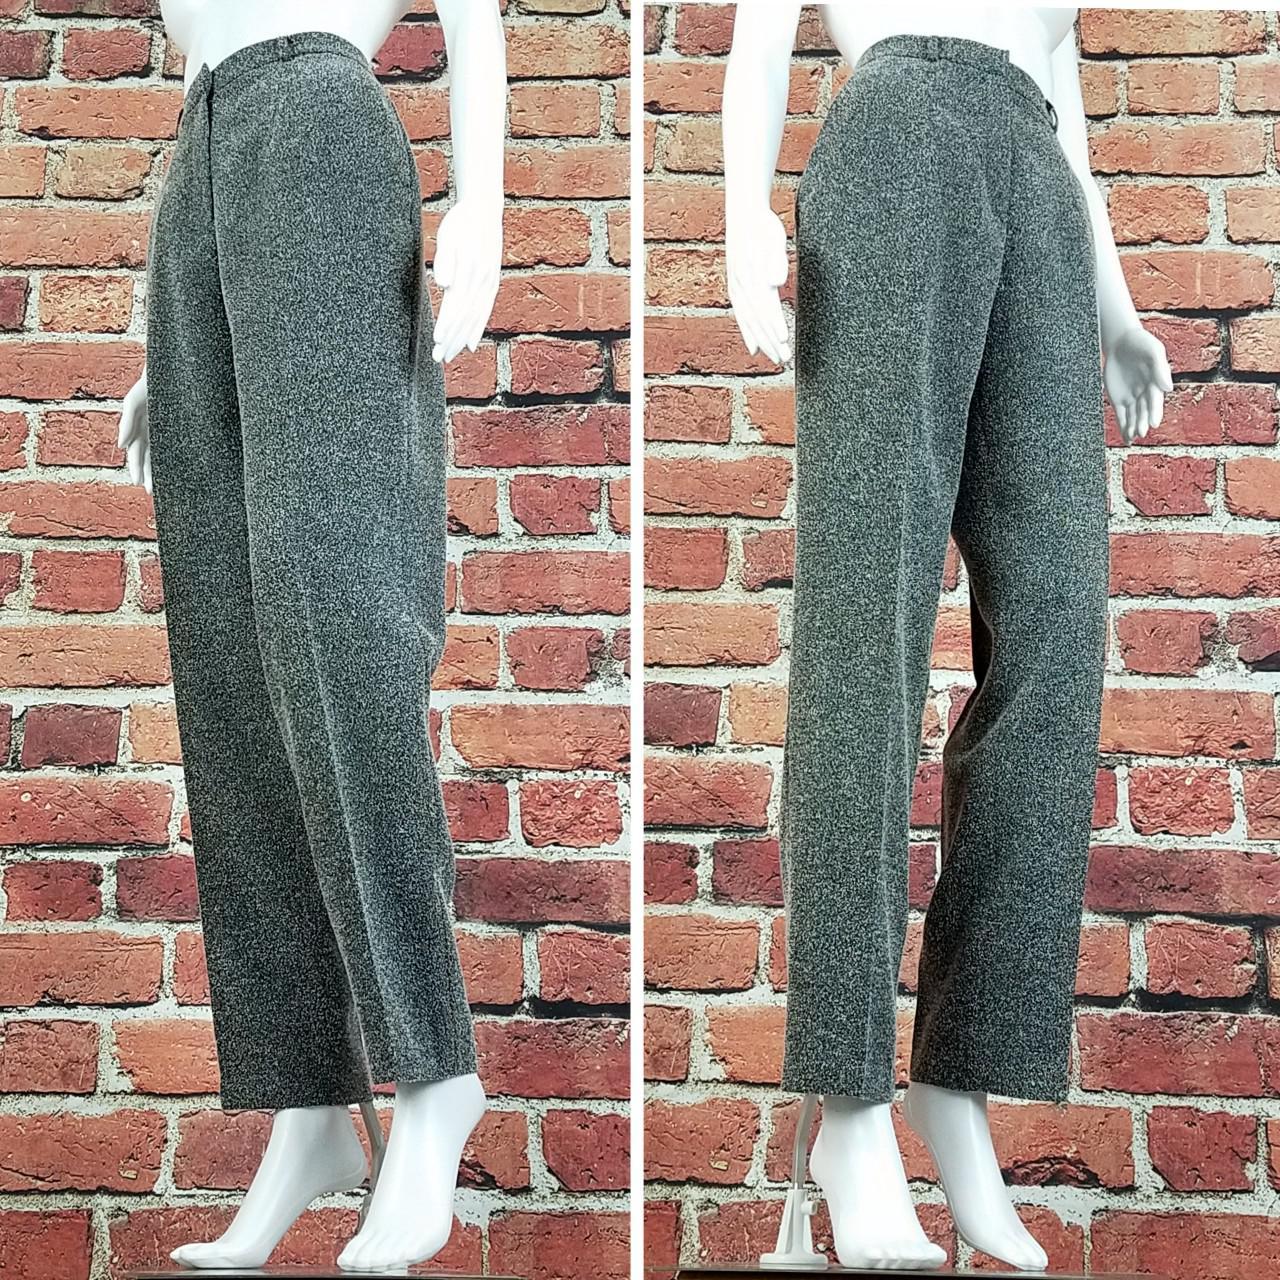 Vintage black trousers High waisted ladies pleated trousers black